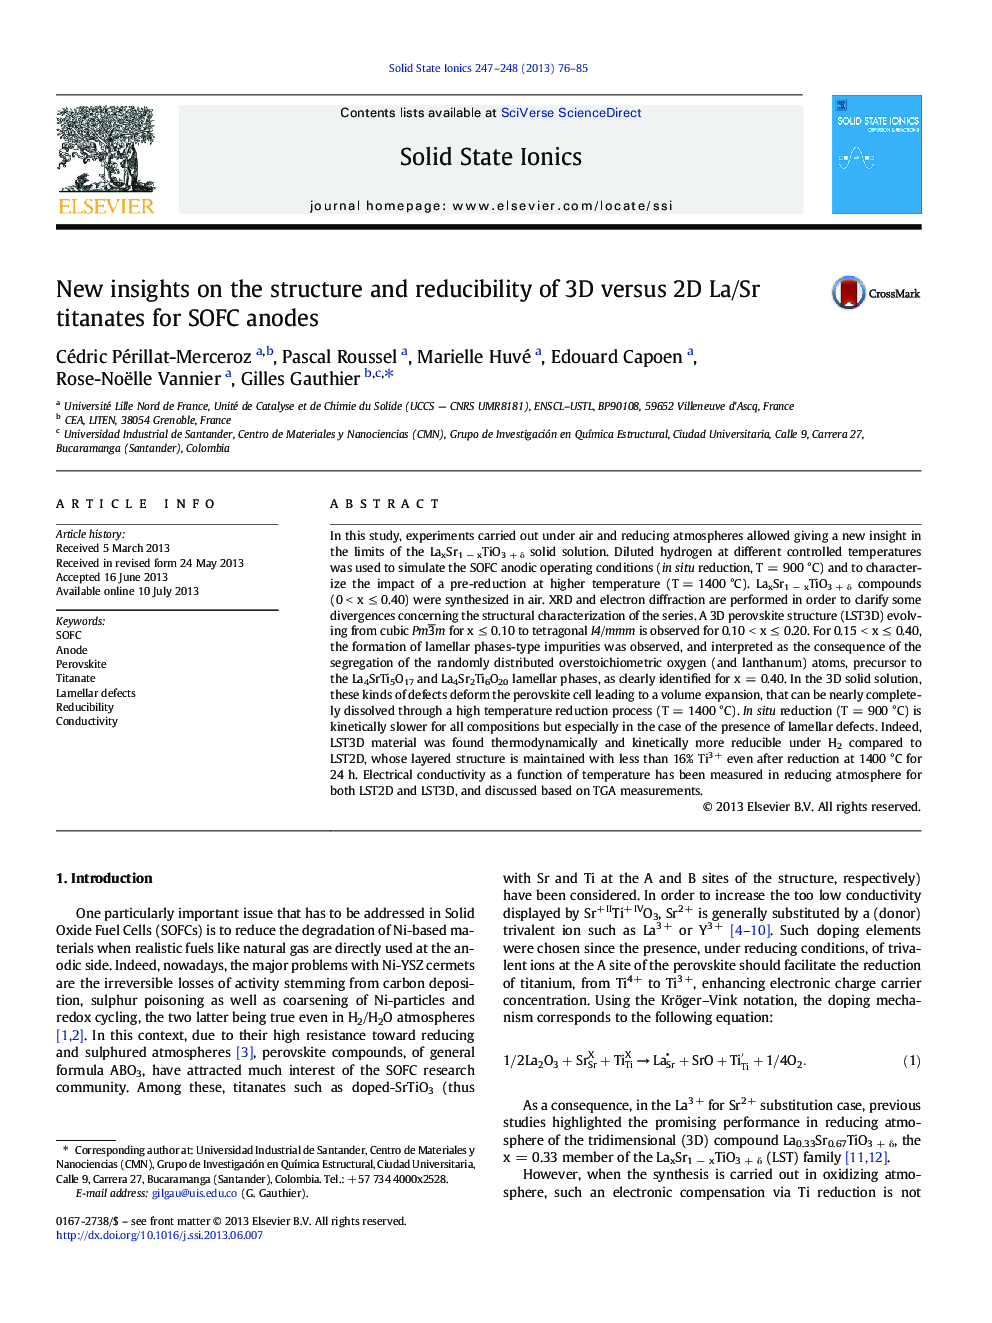 New insights on the structure and reducibility of 3D versus 2D La/Sr titanates for SOFC anodes